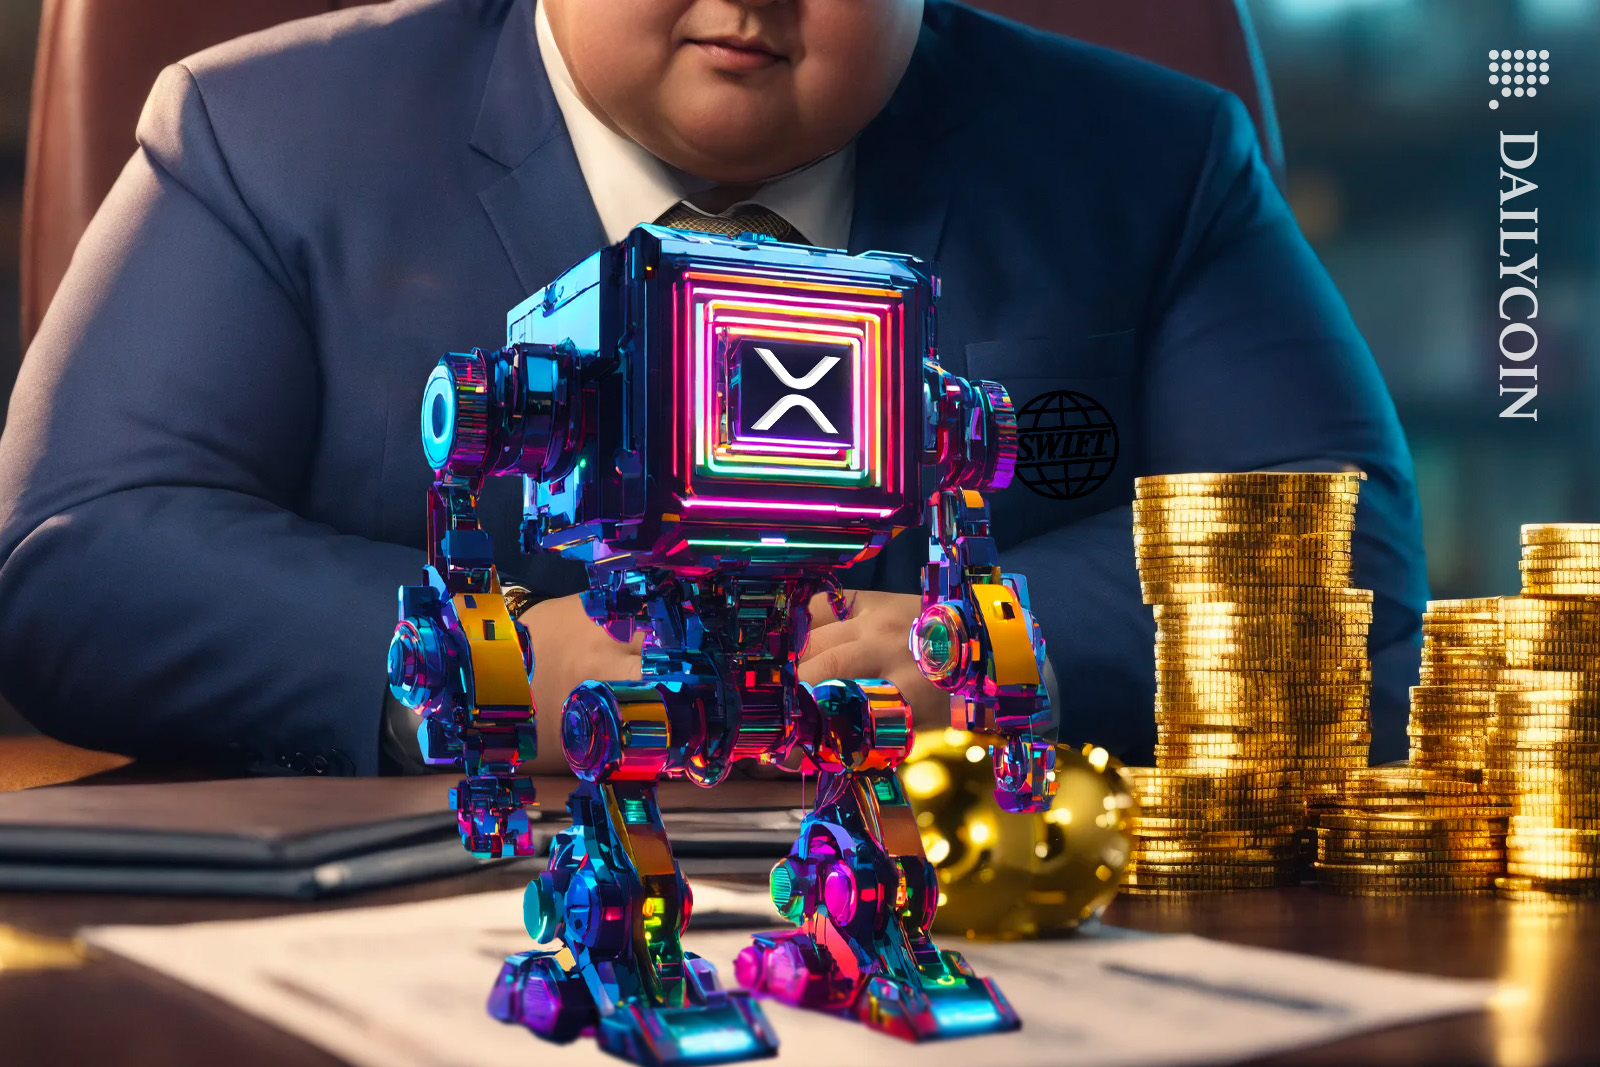 Little XRP robot wants to take the giant Swift banker.